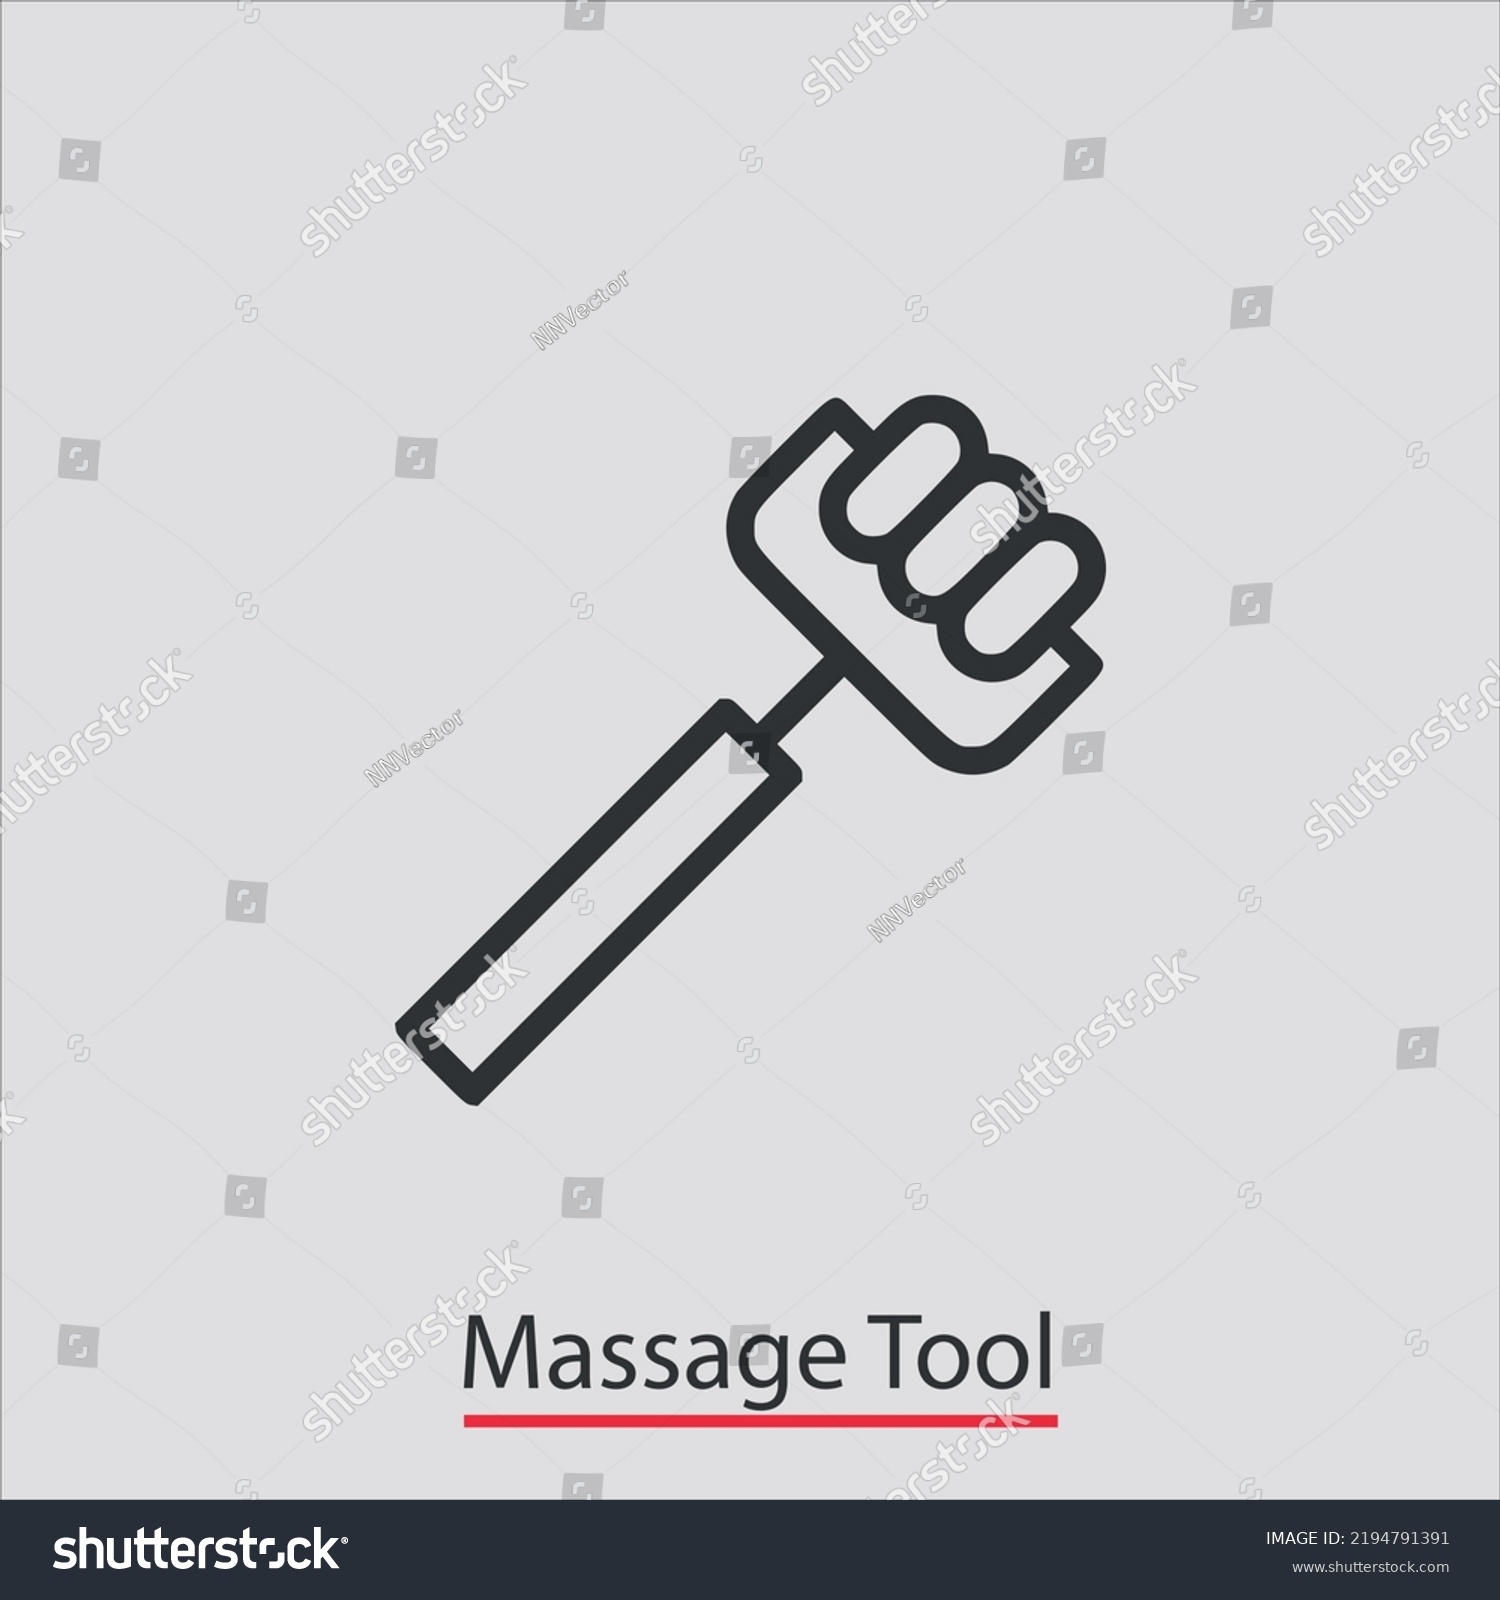 SVG of massage tool icon vector icon.Editable stroke.linear style sign for use web design and mobile apps,logo.Symbol illustration.Pixel vector graphics - Vector svg